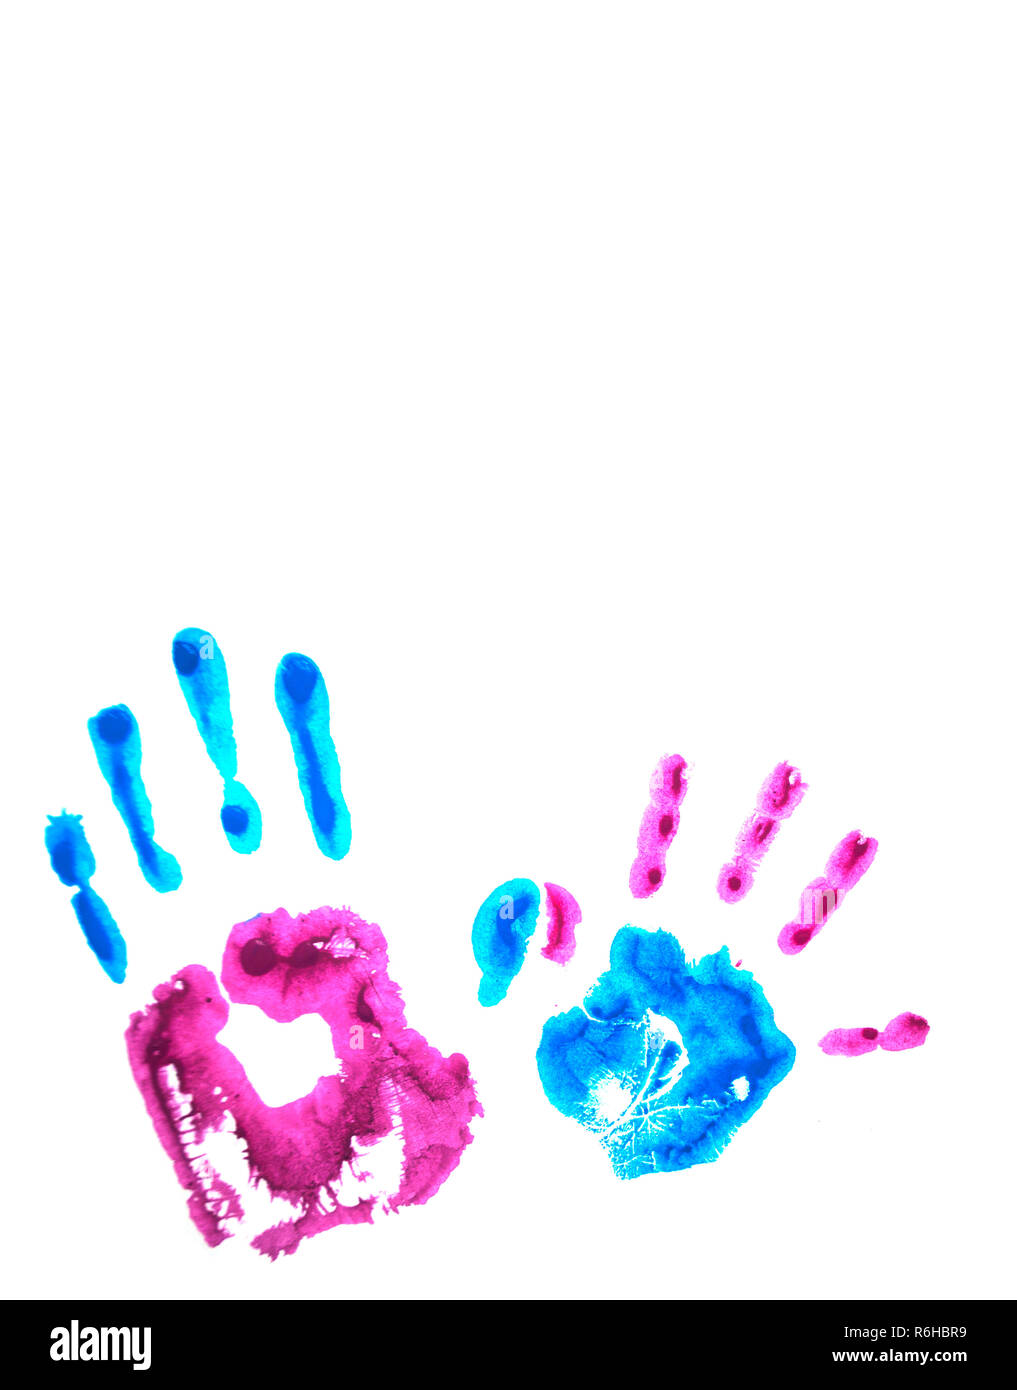 Pink and blue child's handprints isolated on white. Stock Photo